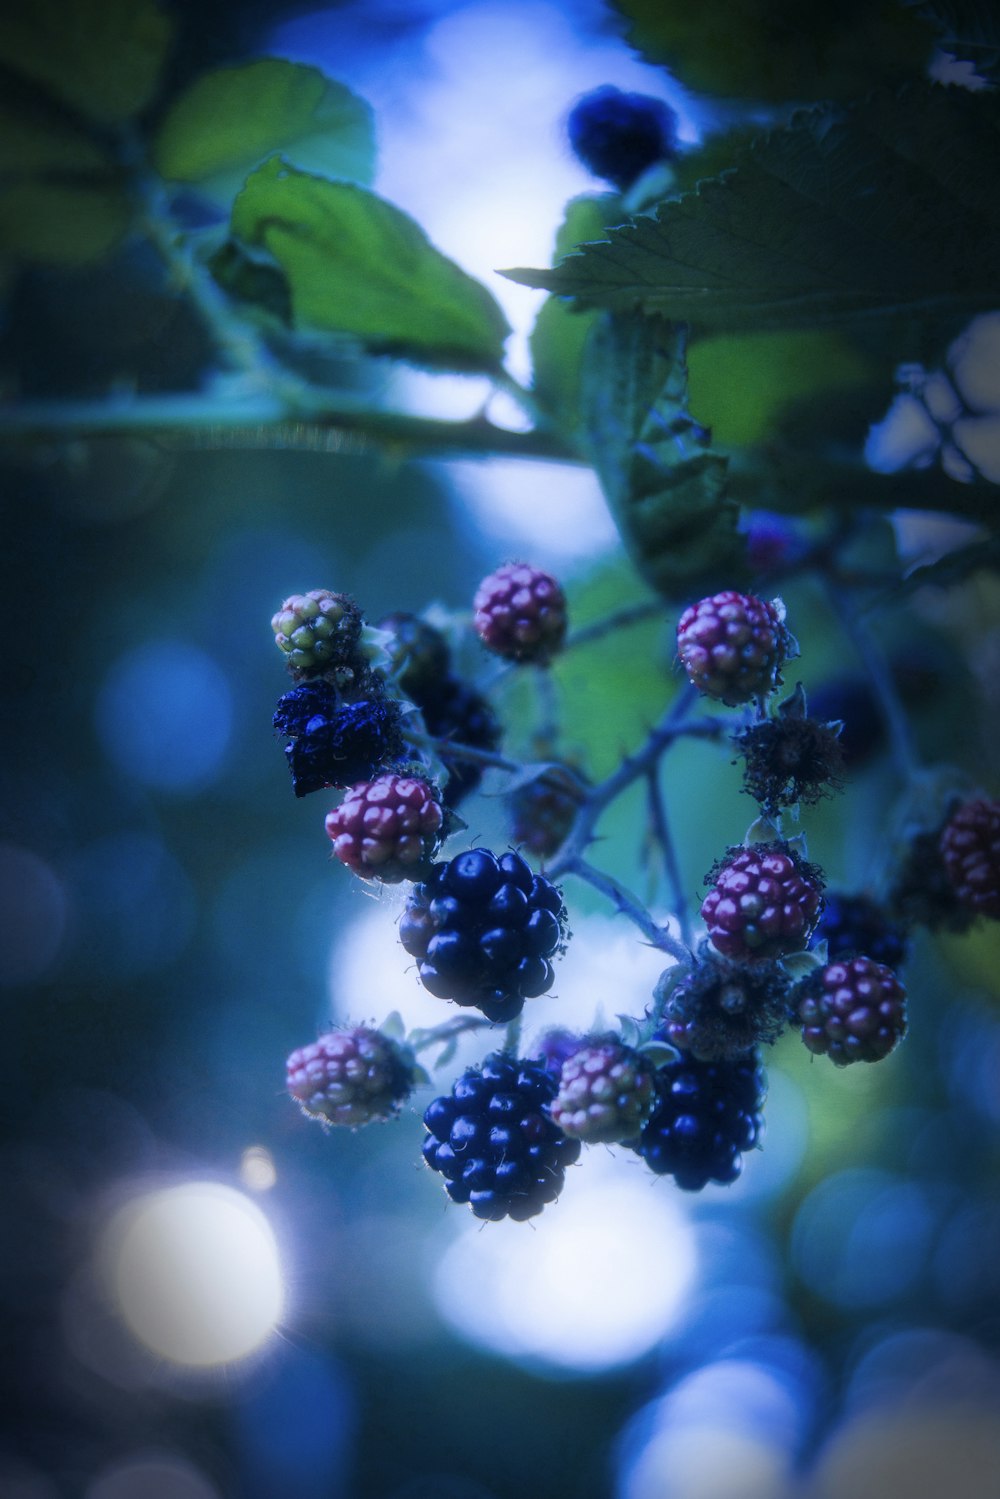 a bunch of berries hanging from a tree branch